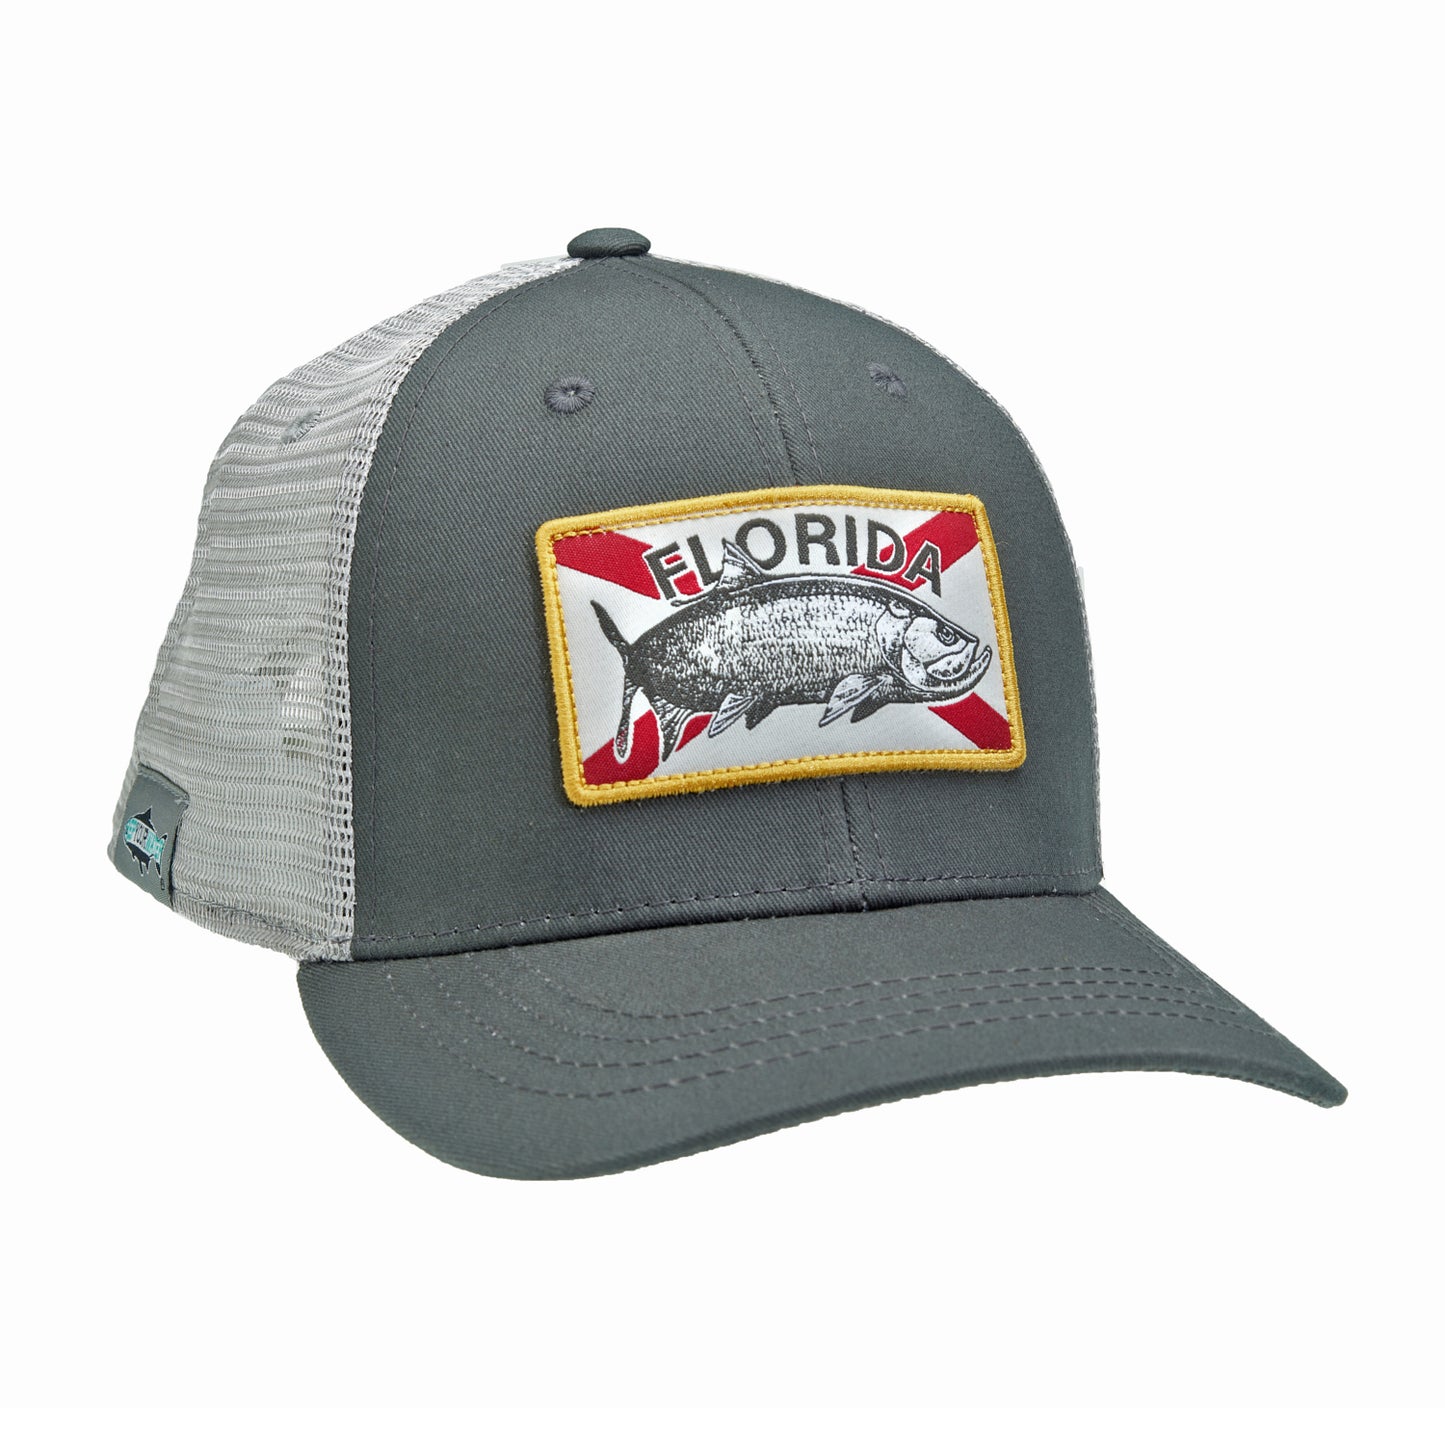 A hat with gray mesh and gray fabric in the front has a rectangular patch with the word florida above a tarpon with a red x behind it